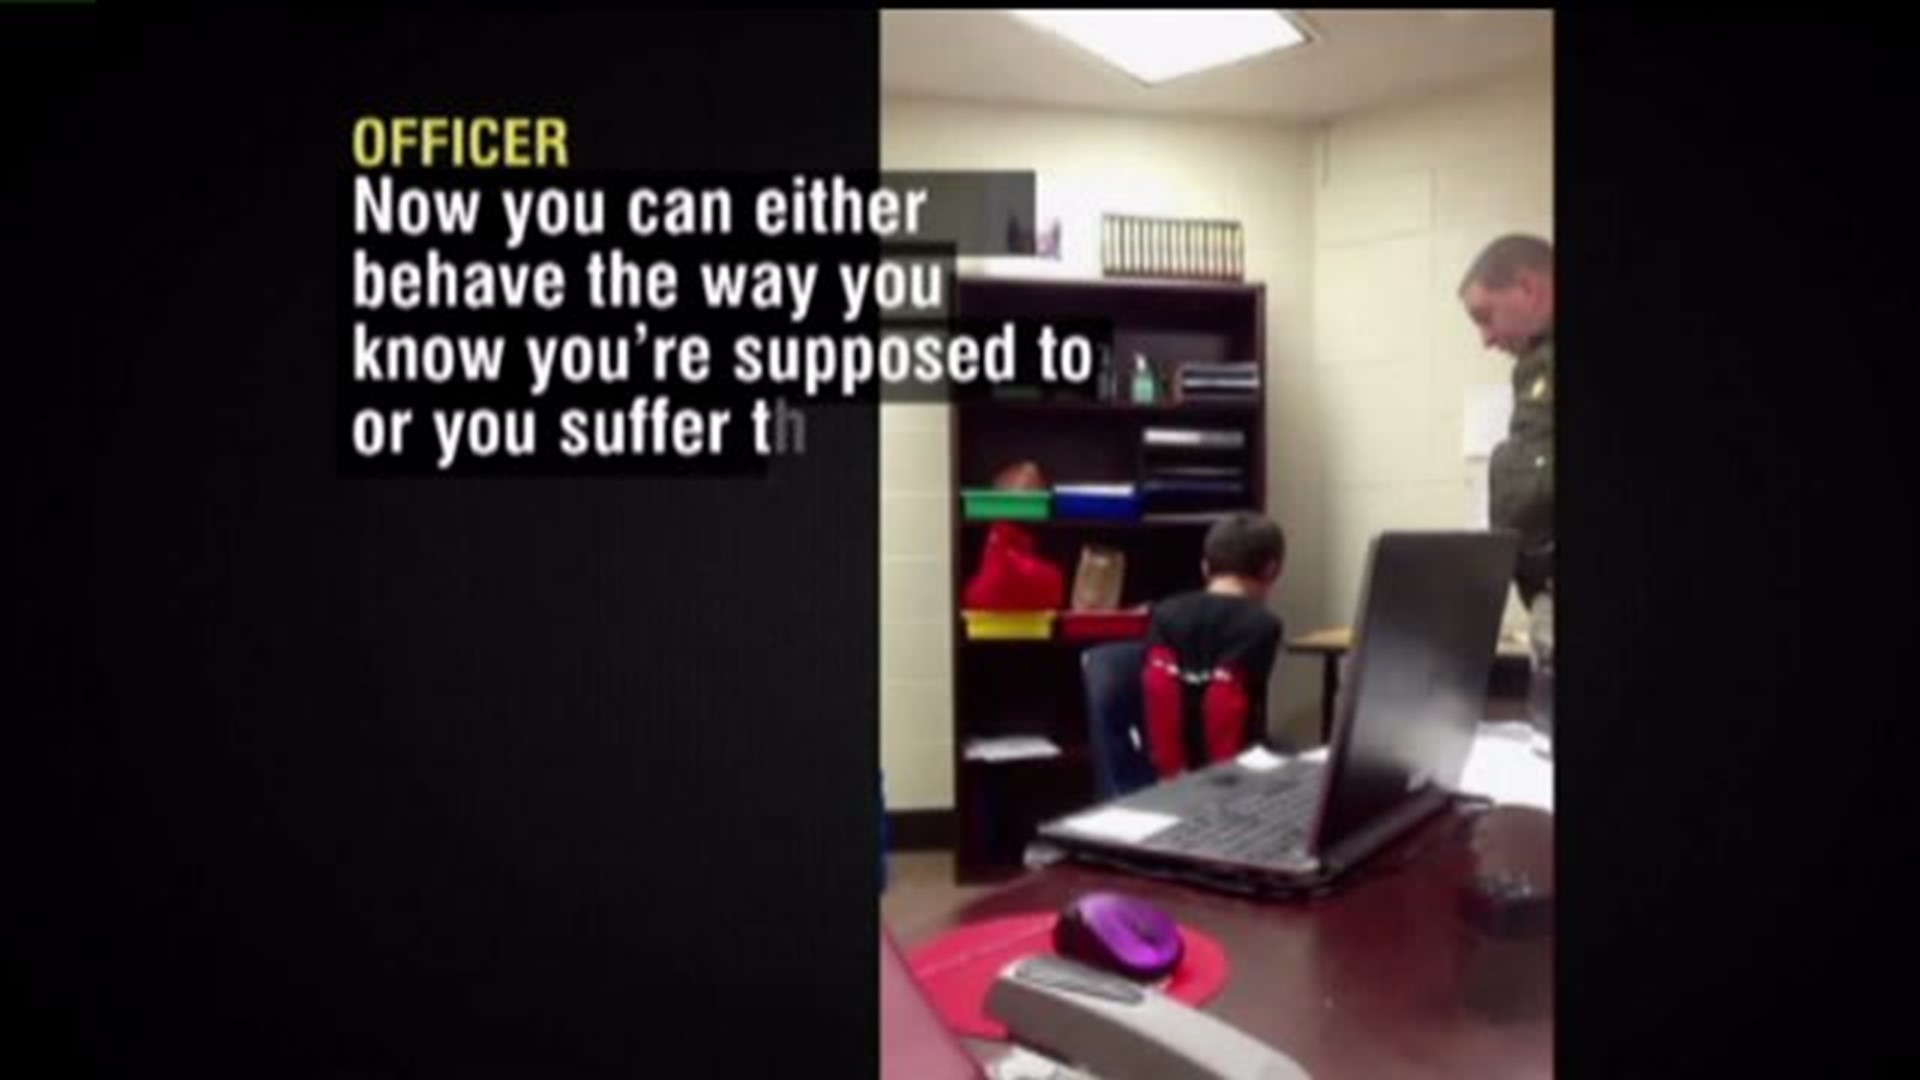 Officer being sued after allegedly handcuffing child for behavioral issue